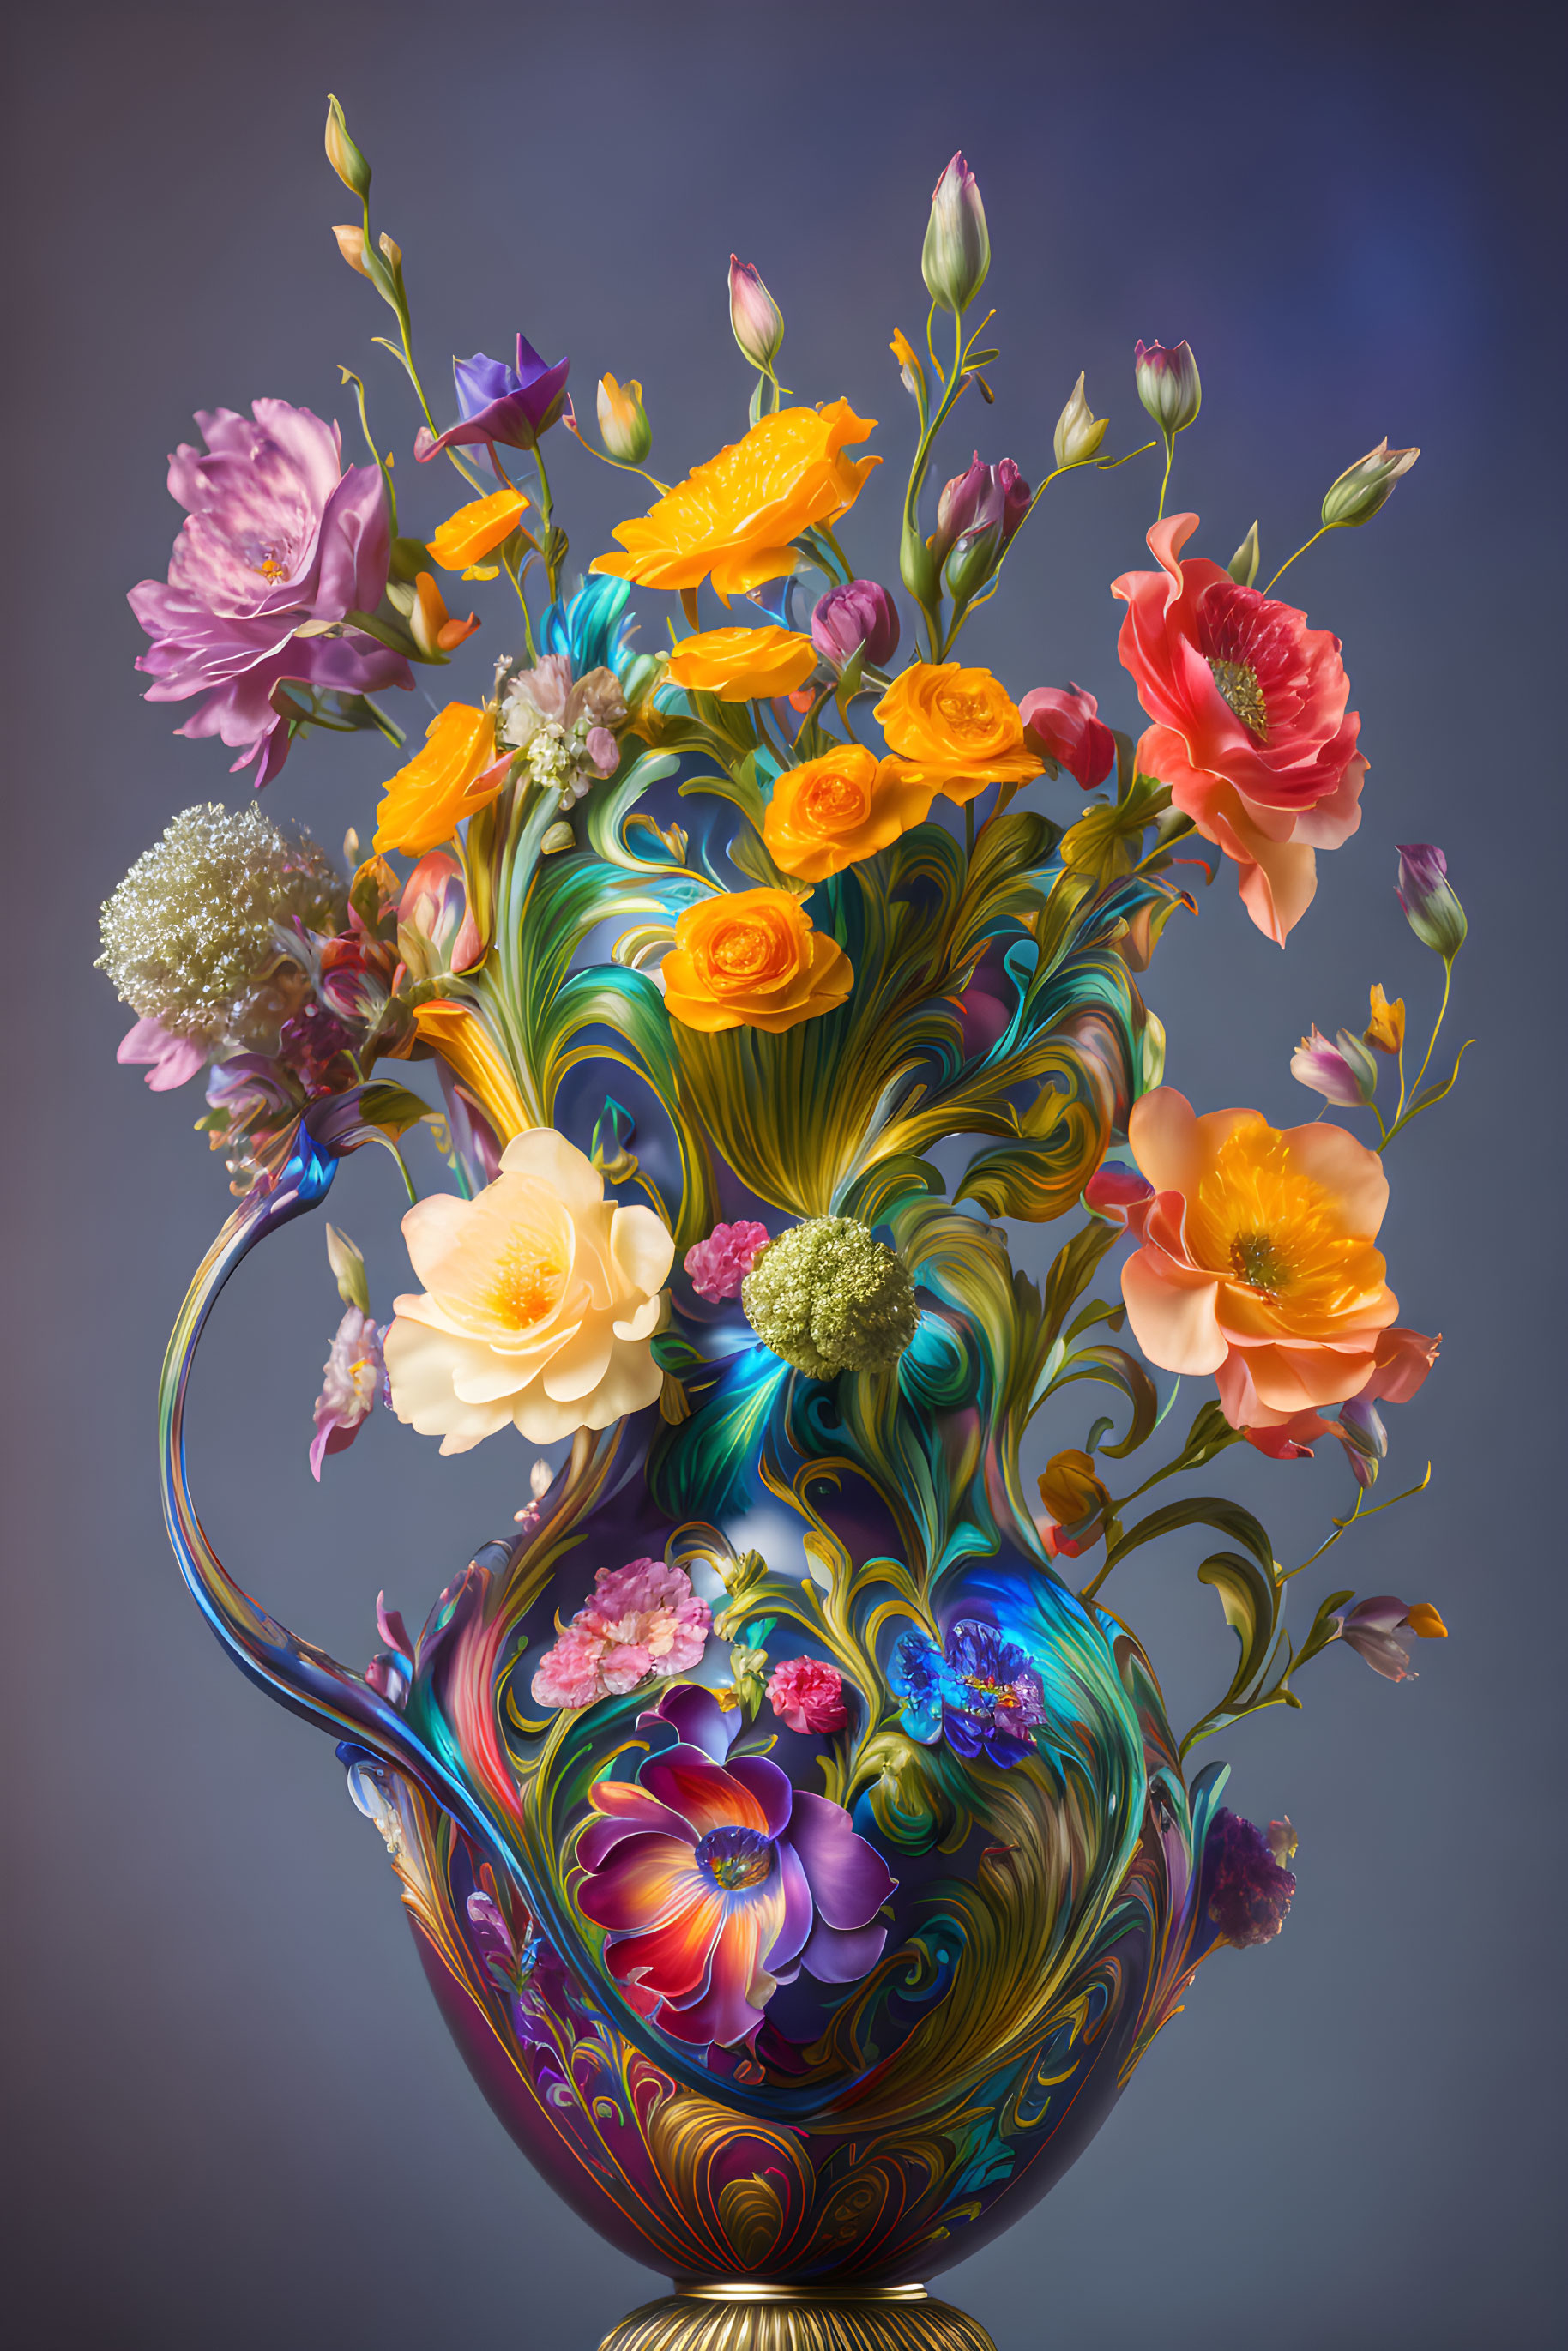 Beautiful flowers in a vase